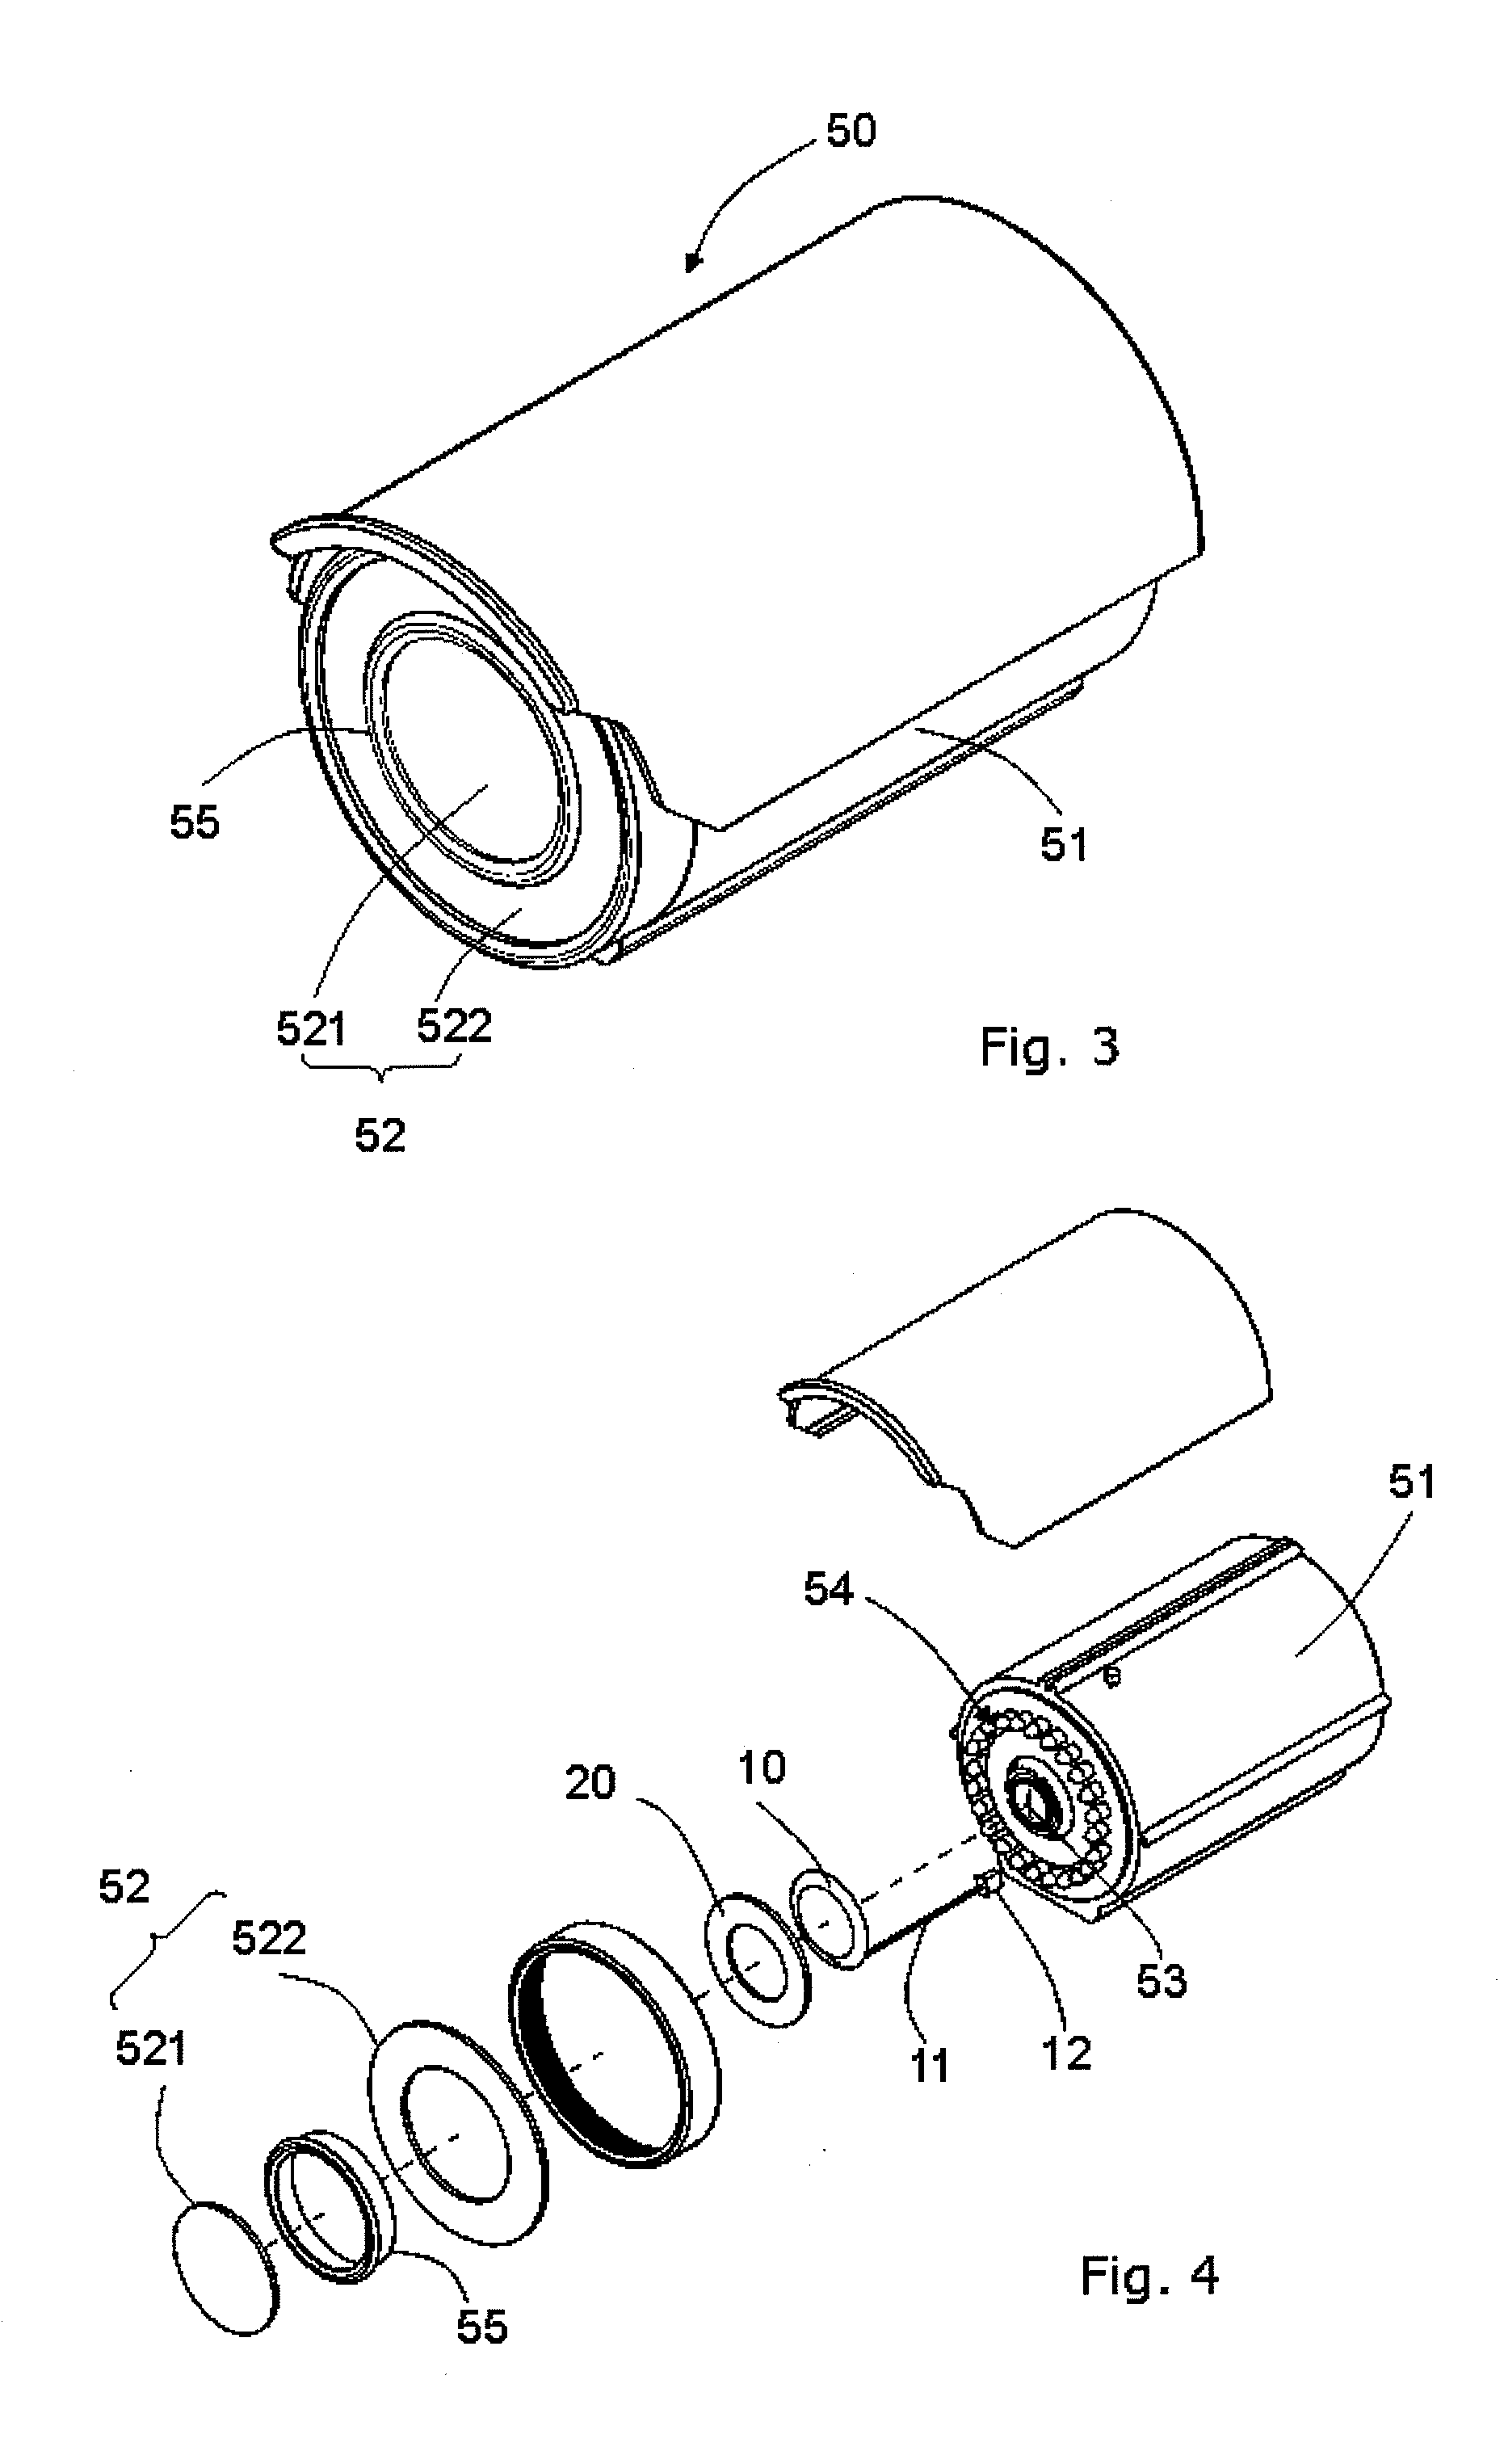 Defogging and defrosting device for protective lens of a camera